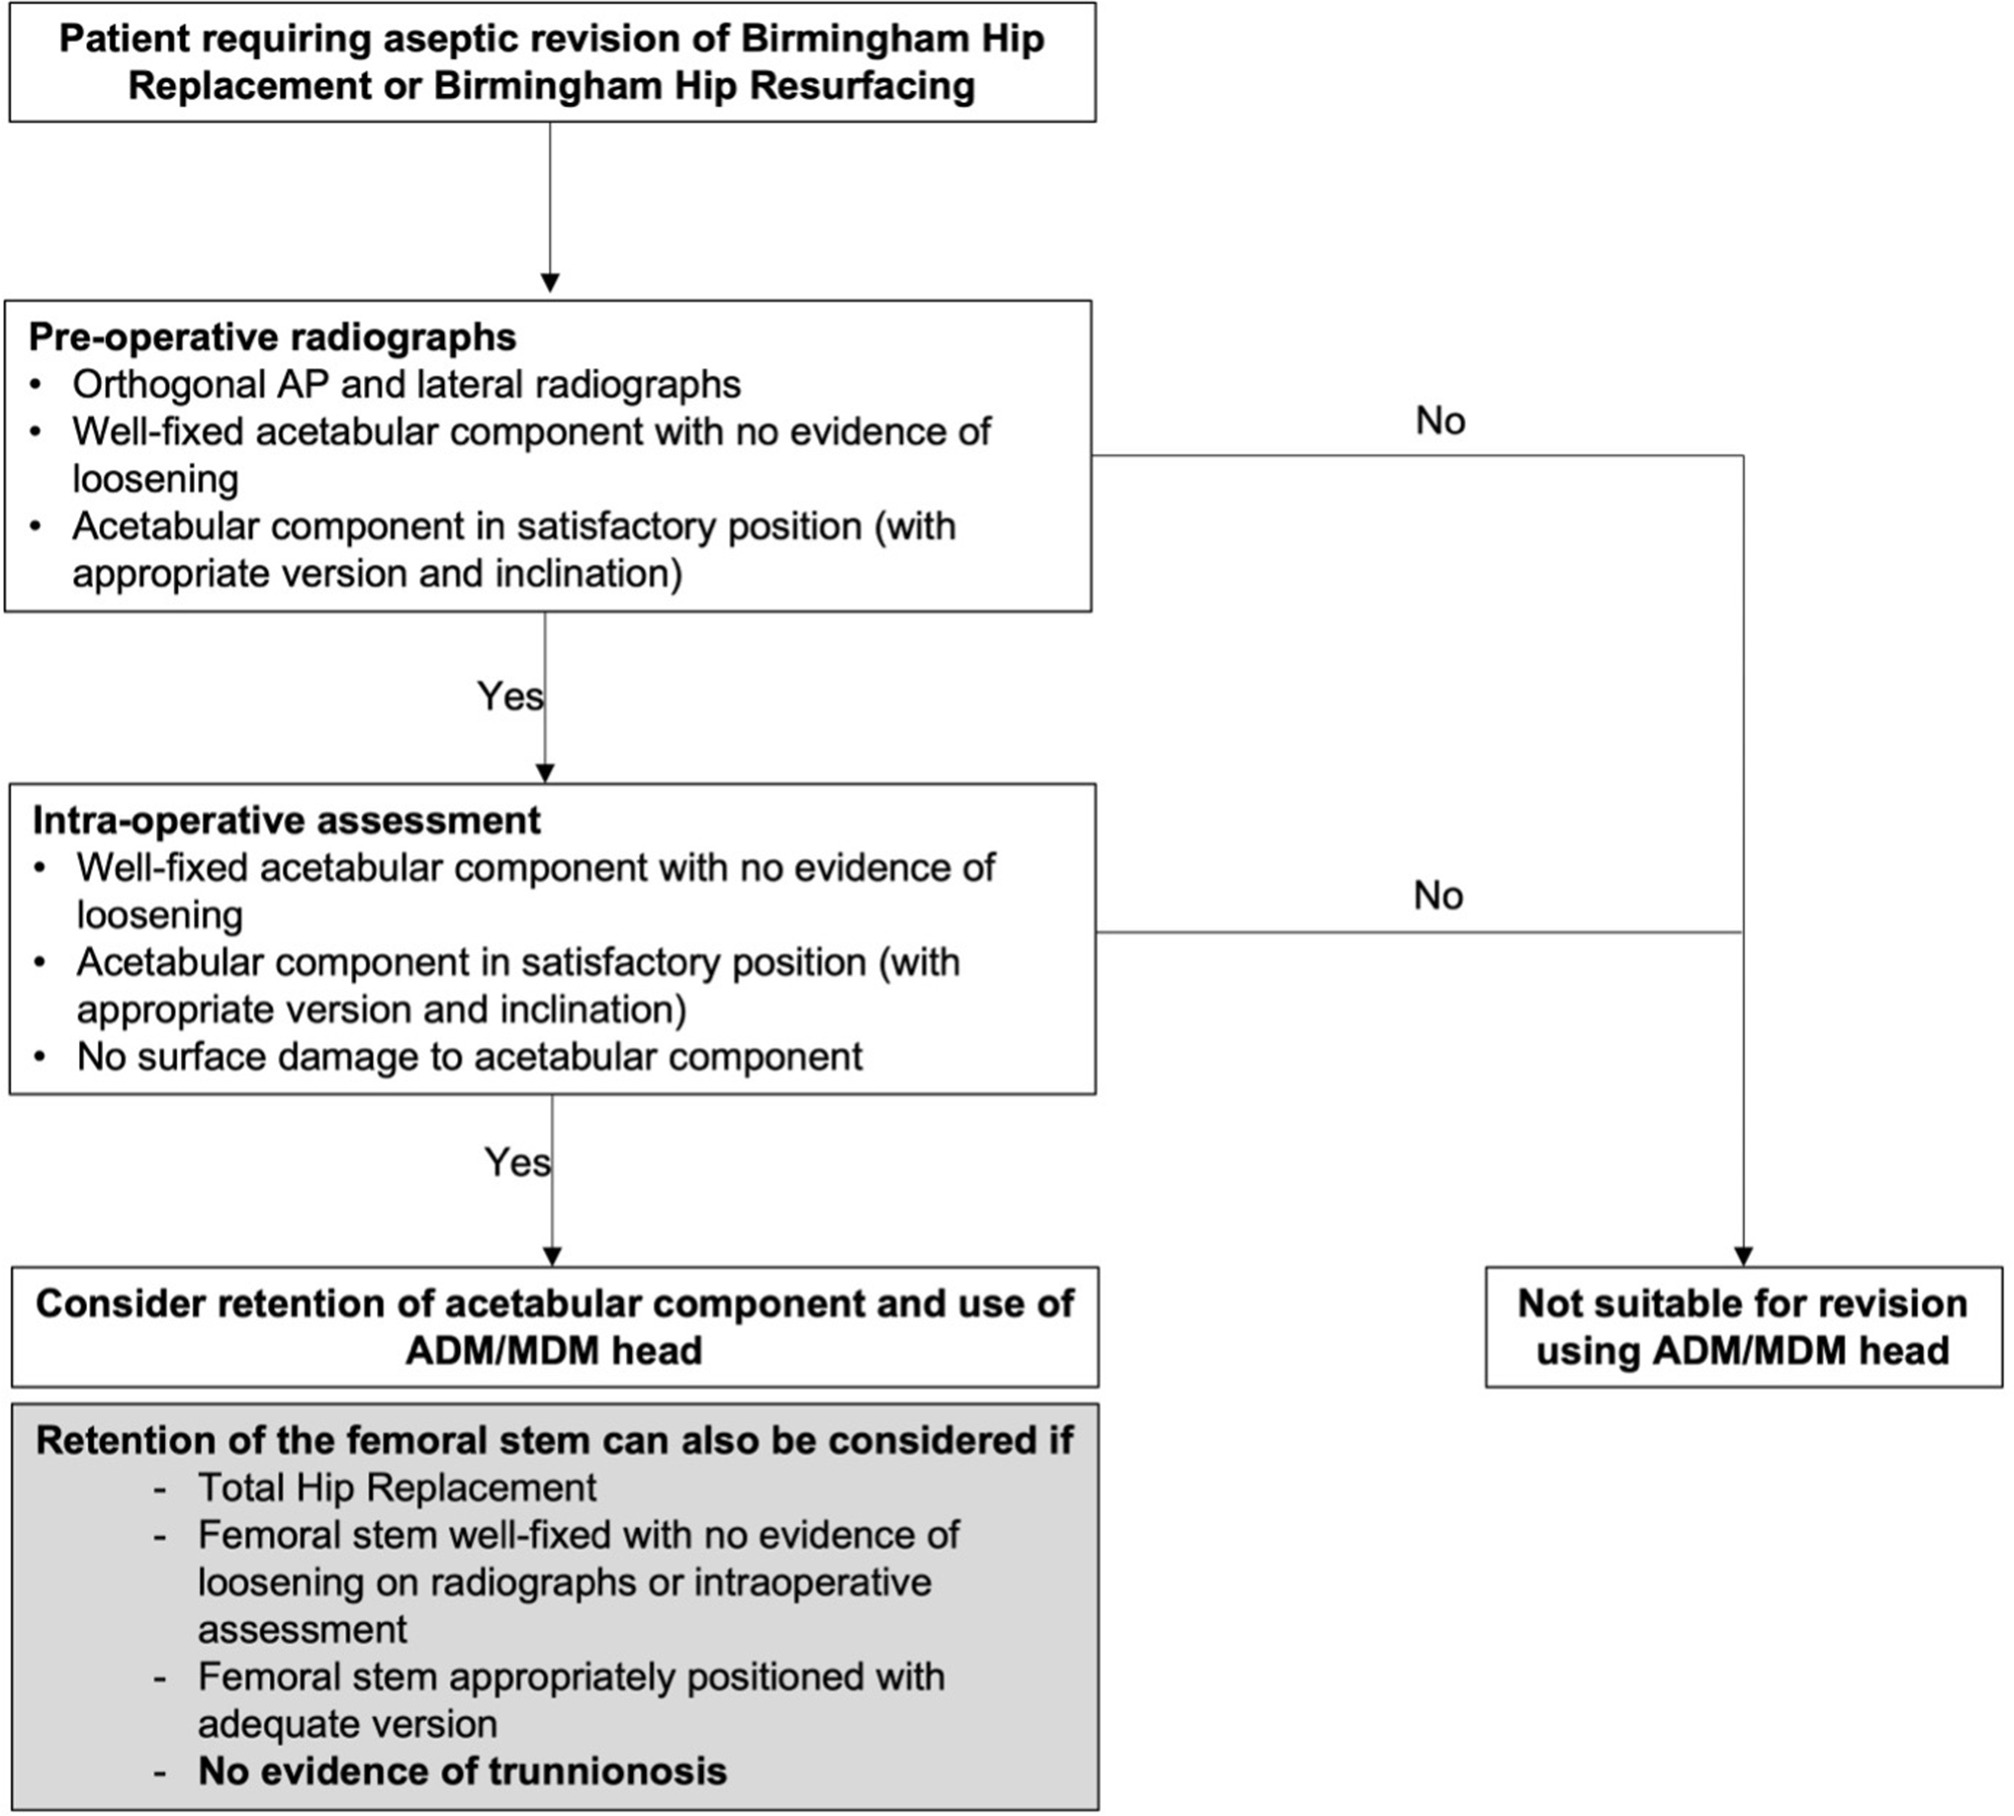 Fig. 1 
            Flowchart showing a suggested pathway for the decision-making process when considering retention of the acetabular component and use of anatomical dual-mobility (ADM)/modular dual-mobility (MDM) components in revision of a Birmingham metal-on-metal total hip arthroplasty or hip resurfacing. AP, anteroposterior.
          